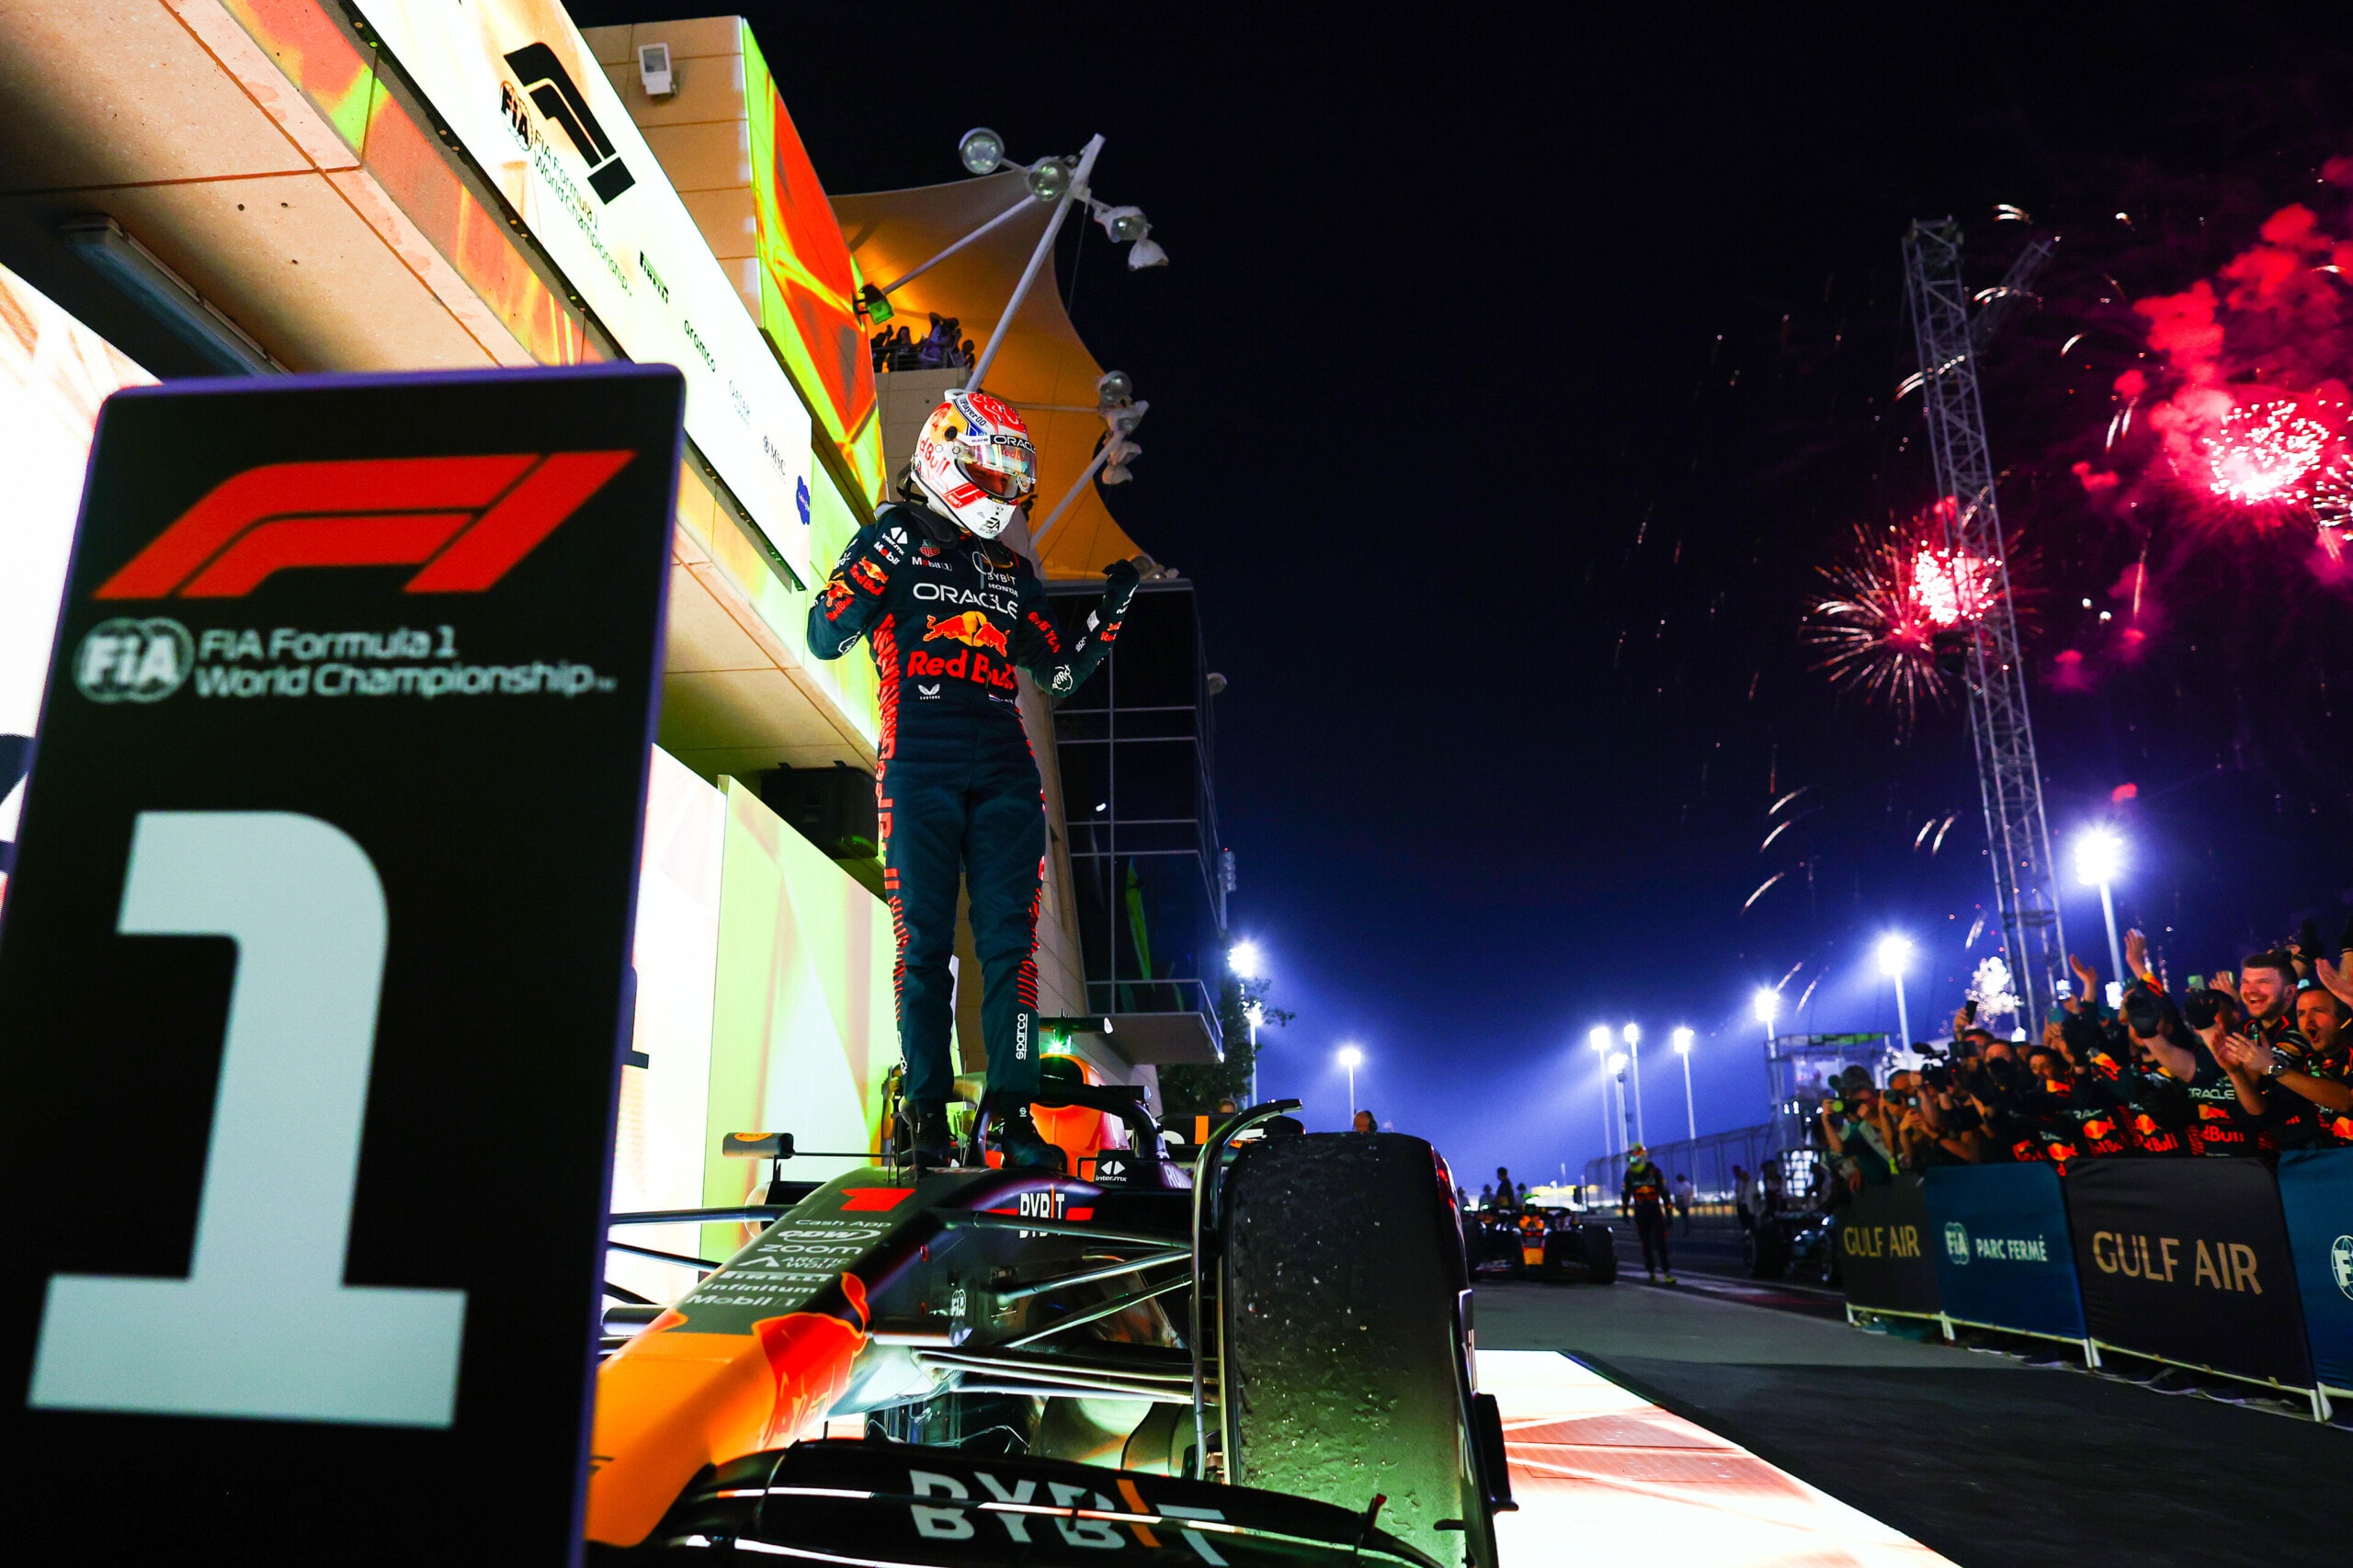 BAHRAIN, BAHRAIN - MARCH 05: Race winner Max Verstappen of the Netherlands and Oracle Red Bull Racing celebrates in parc ferme during the F1 Grand Prix of Bahrain at Bahrain International Circuit on March 05, 2023 in Bahrain, Bahrain. (Photo by Mark Thompson/Getty Images) // Getty Images / Red Bull Content Pool // SI202303050346 // Usage for editorial use only //